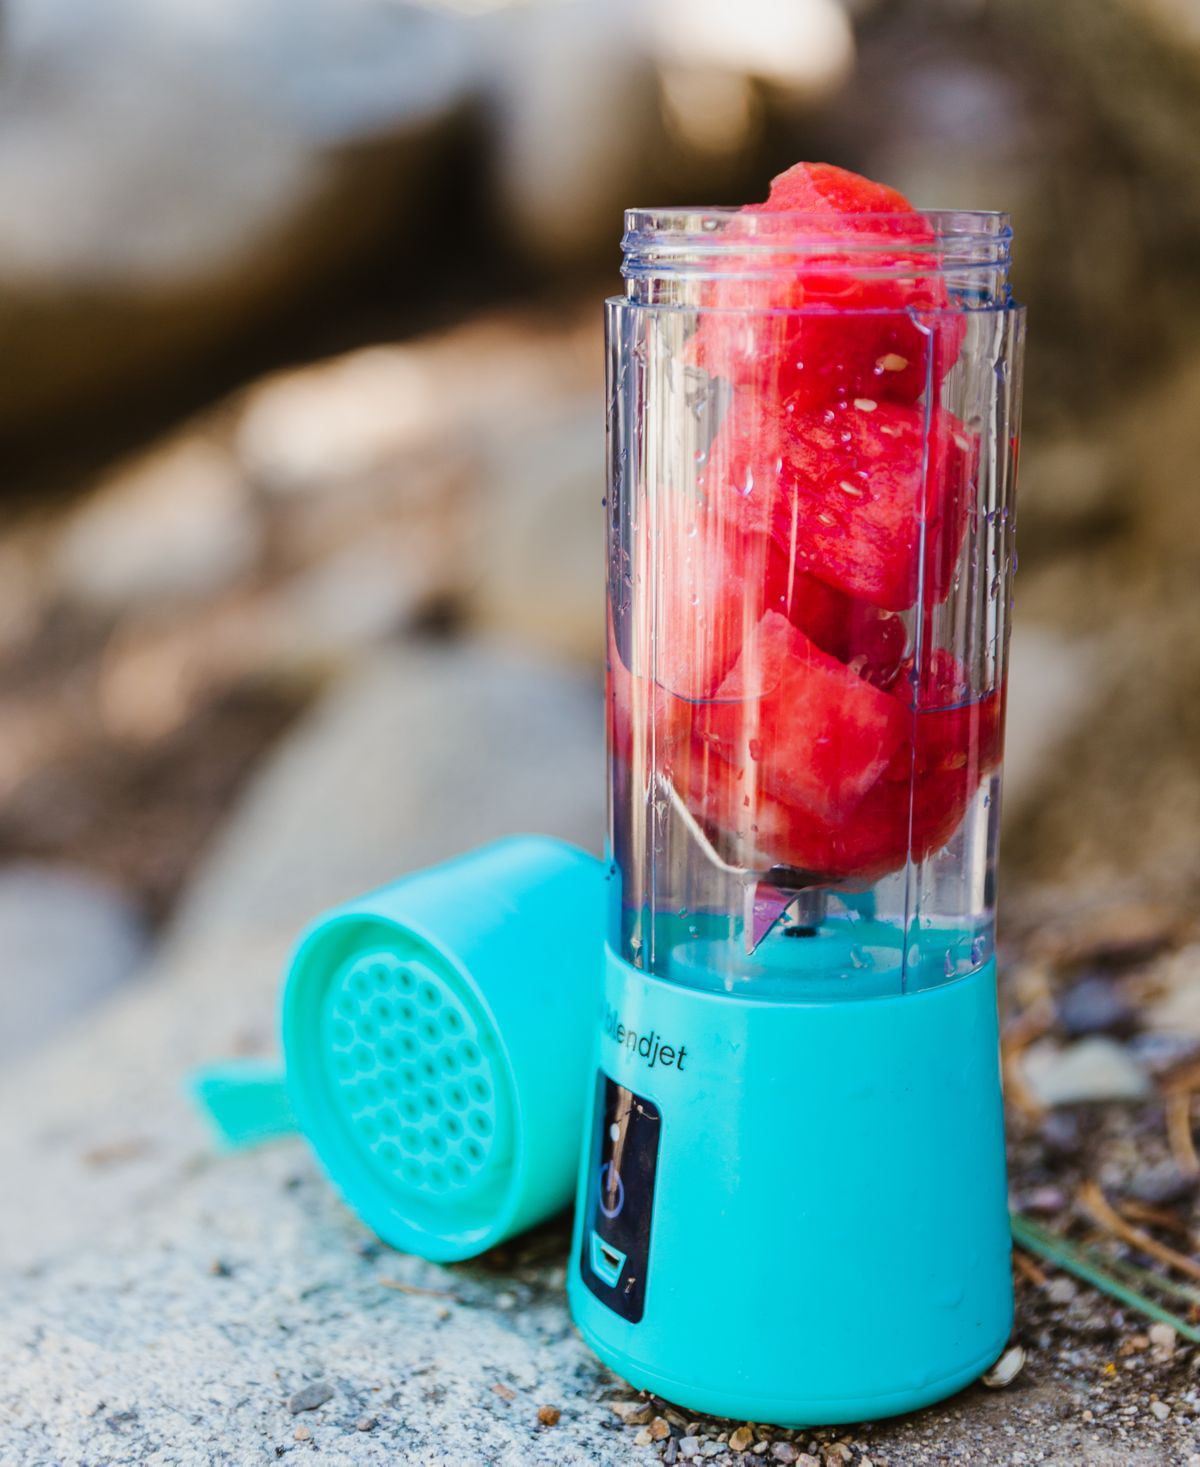 BlendJet One Review: The Portable Blender With Power